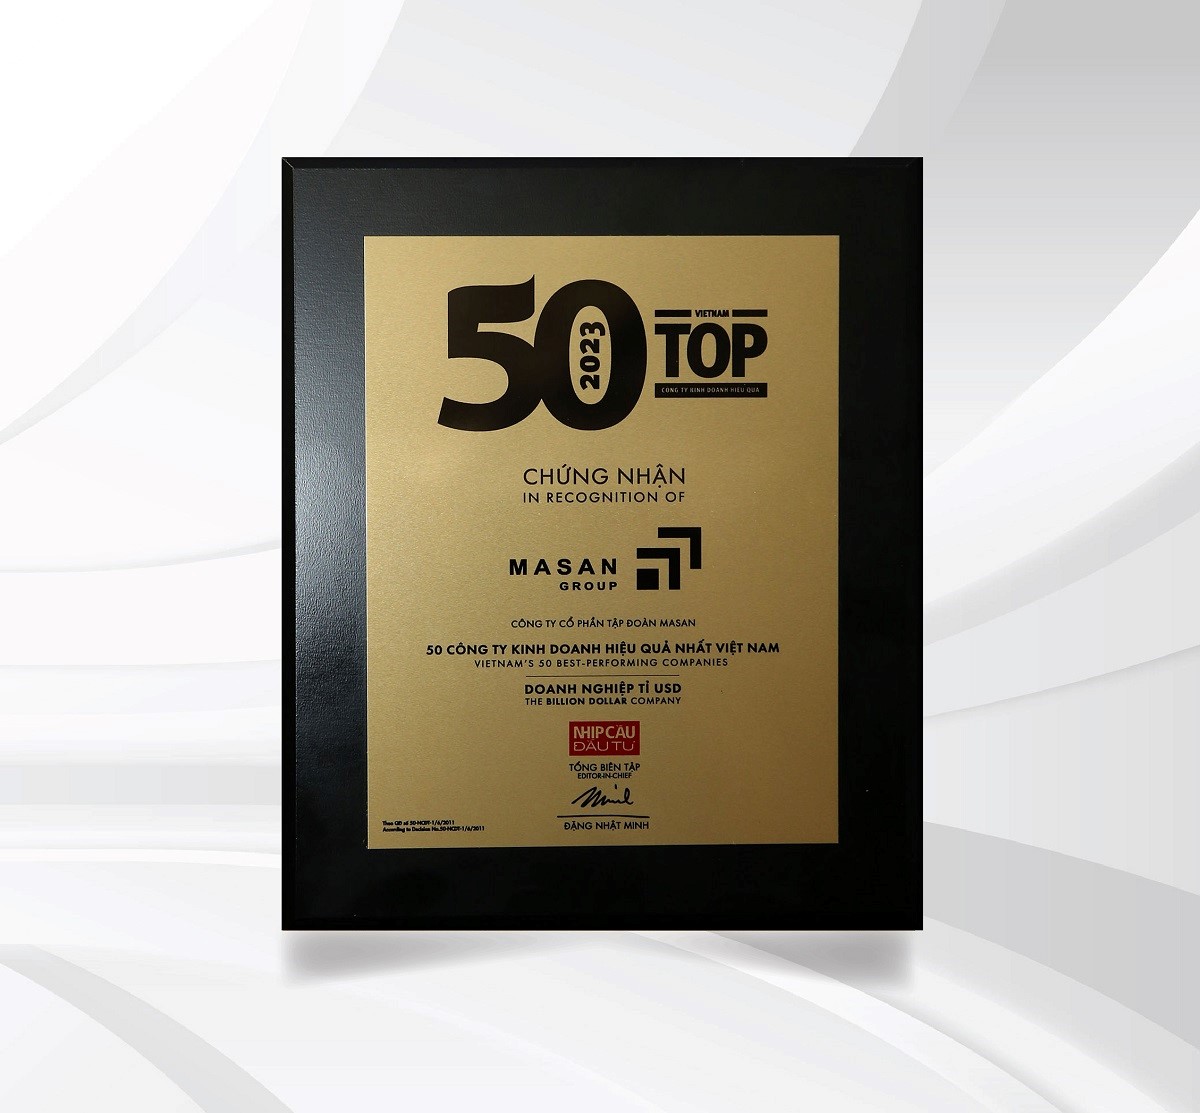 Certificate honoring Masan in the Top 50 most effective businesses in Vietnam.